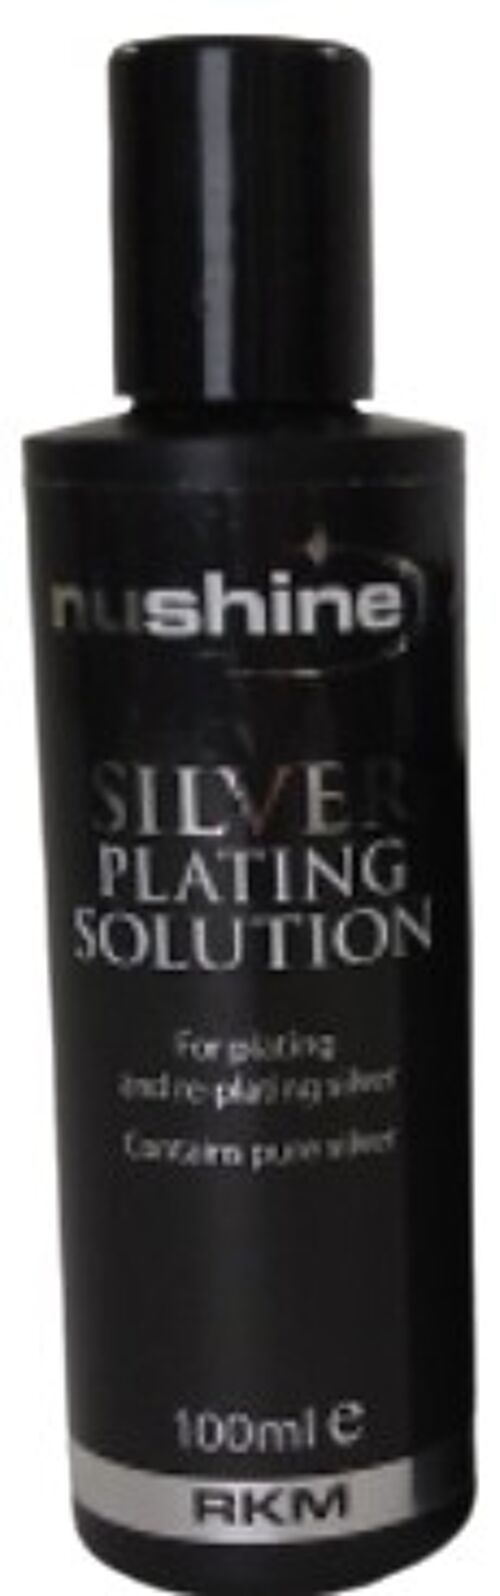 Nushine Silver Plating Solution 100ml - permanently plate PURE SILVER onto worn silver, brass, copper and bronze (eco friendly formula)